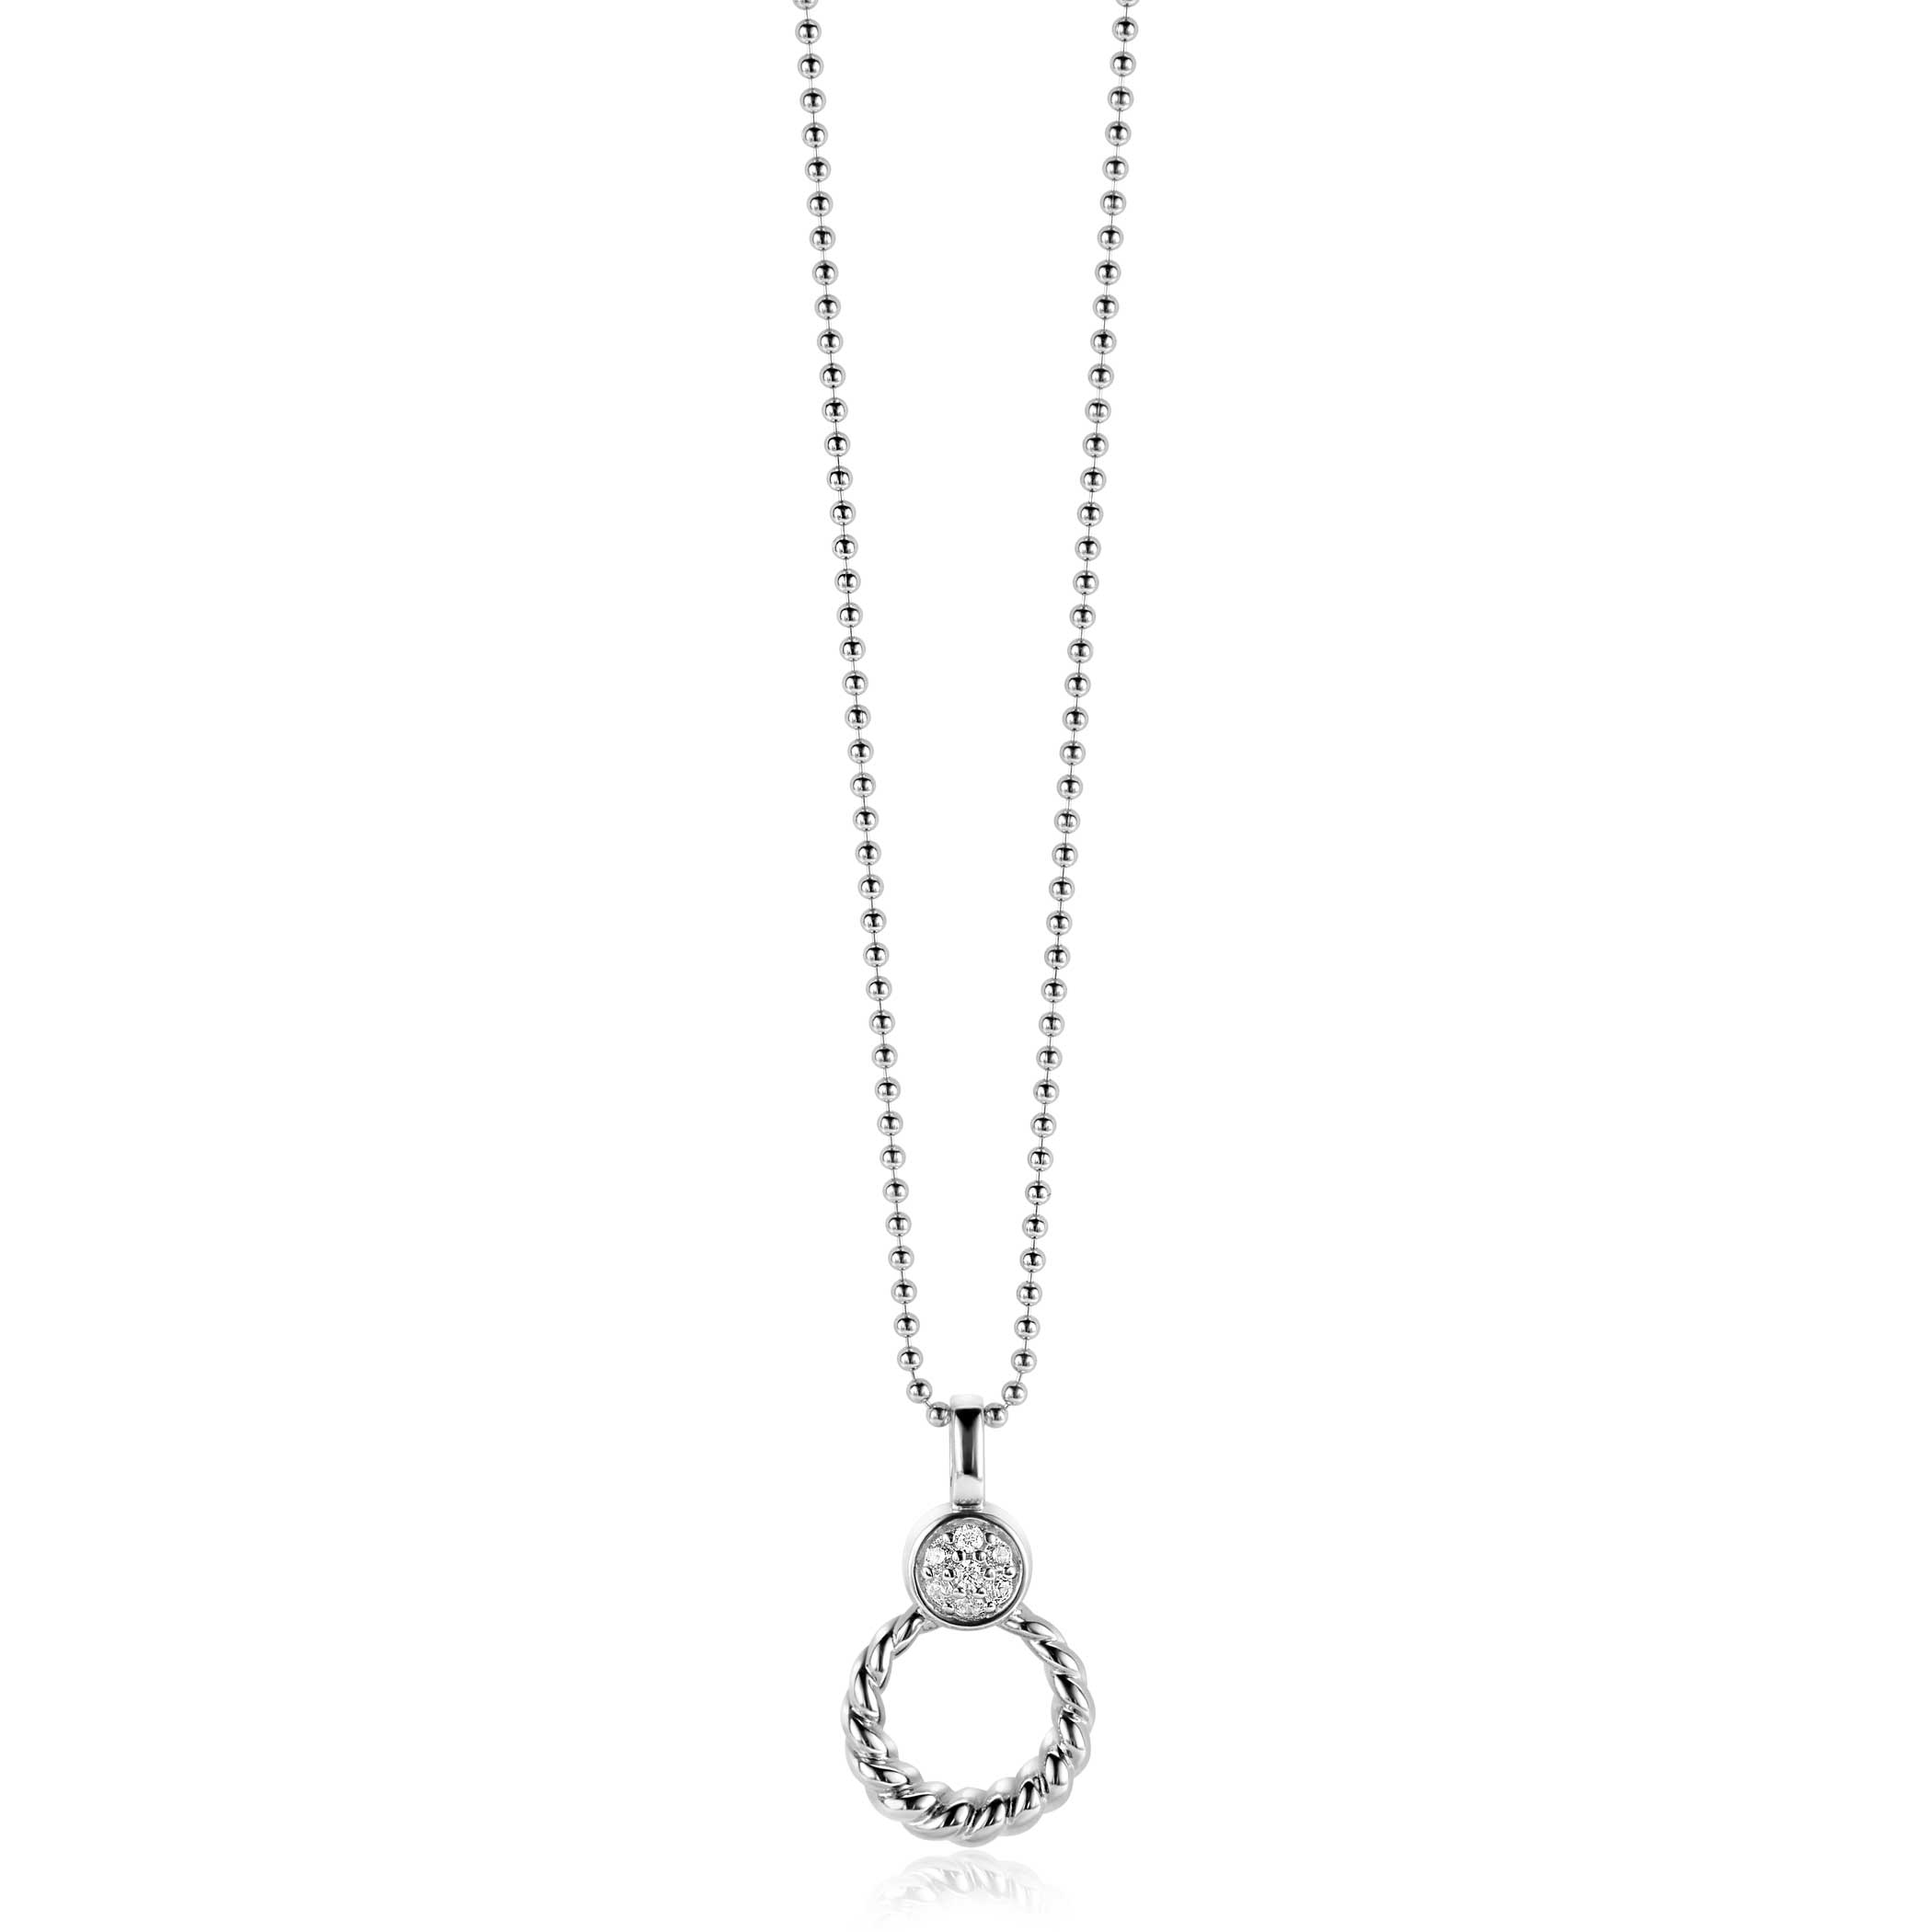 20mm ZINZI Sterling Silver Round Pendant Rope Design White Zirconias ZIH2390 (excl. necklace)